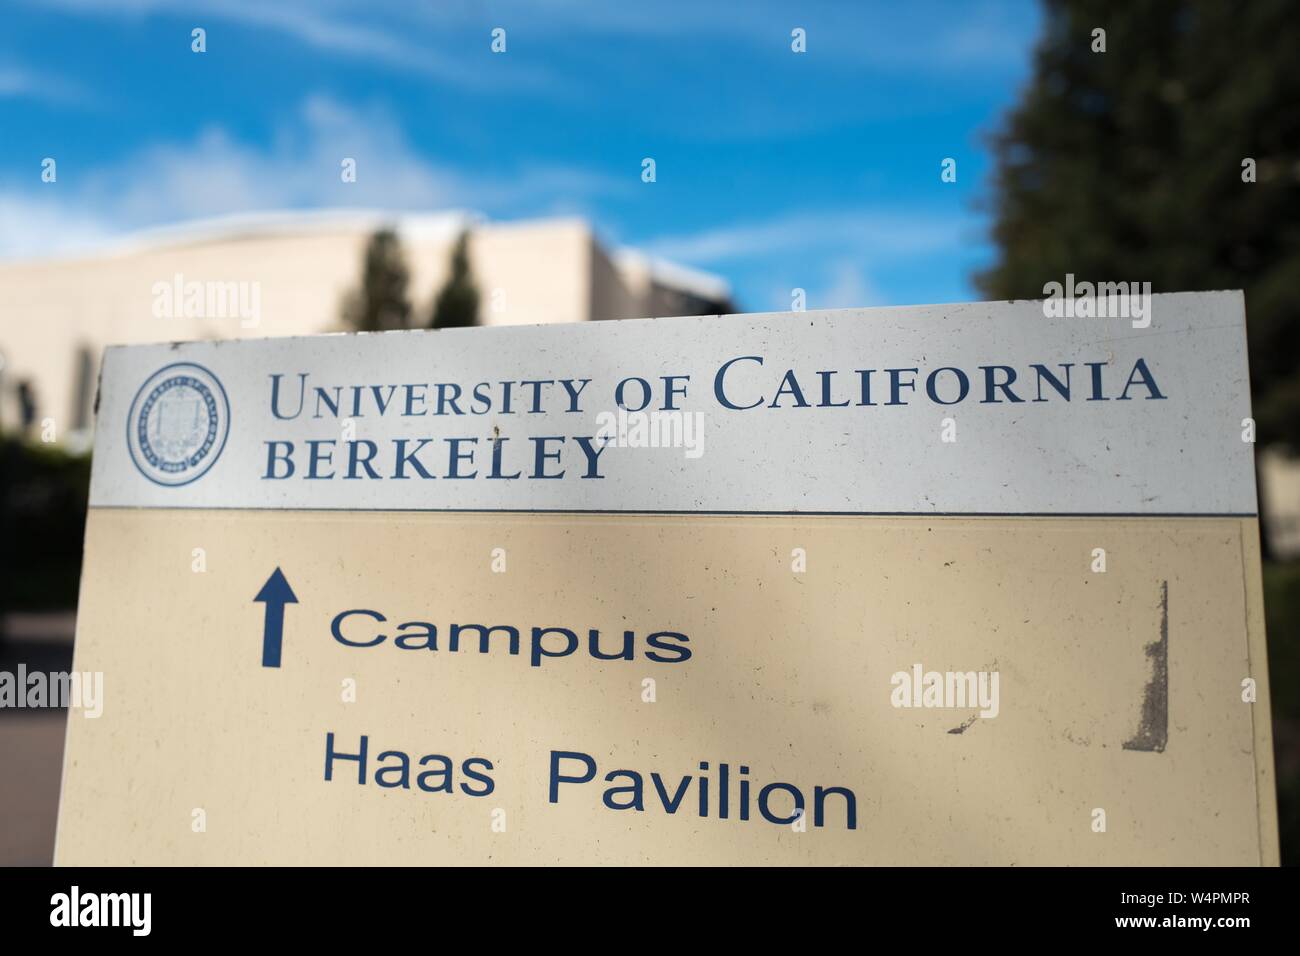 Close-up of sign with text reading University of California Berkeley with arrow directing visitors to the campus of UC Berkeley in Berkeley, California, October 9, 2018. () Stock Photo